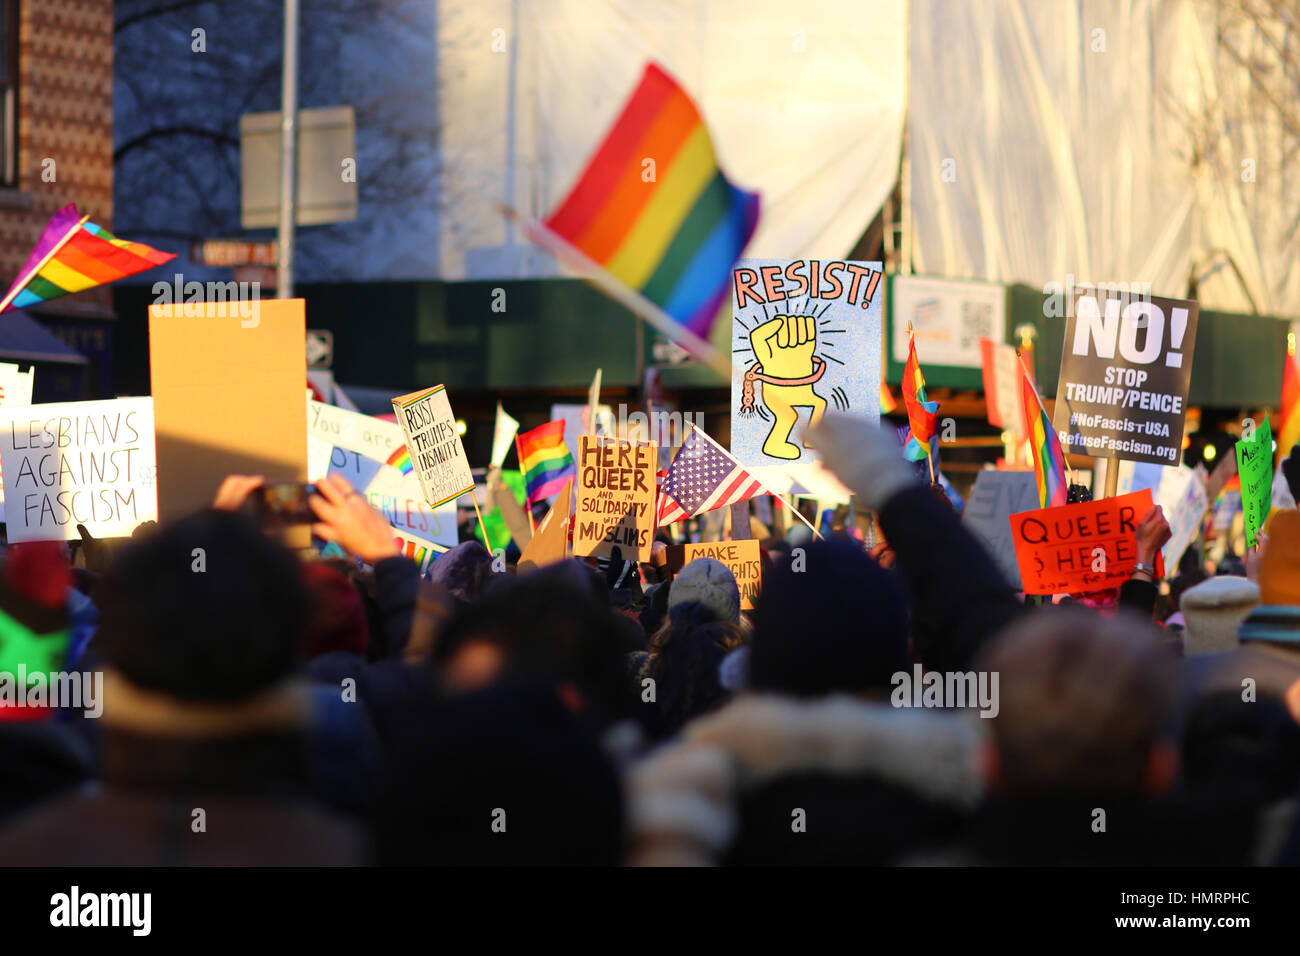 New York, USA. 4th February, 2017. Demonstrators at the LGBTQ Solidary rally in front of the Stonewall Inn against executive orders issued by President Trump banning people from seven Muslim-majority countries from entering the U.S. People want to show support for those most affected by recent policies enacted by Donald Trump. February 4, 2017 Stock Photo